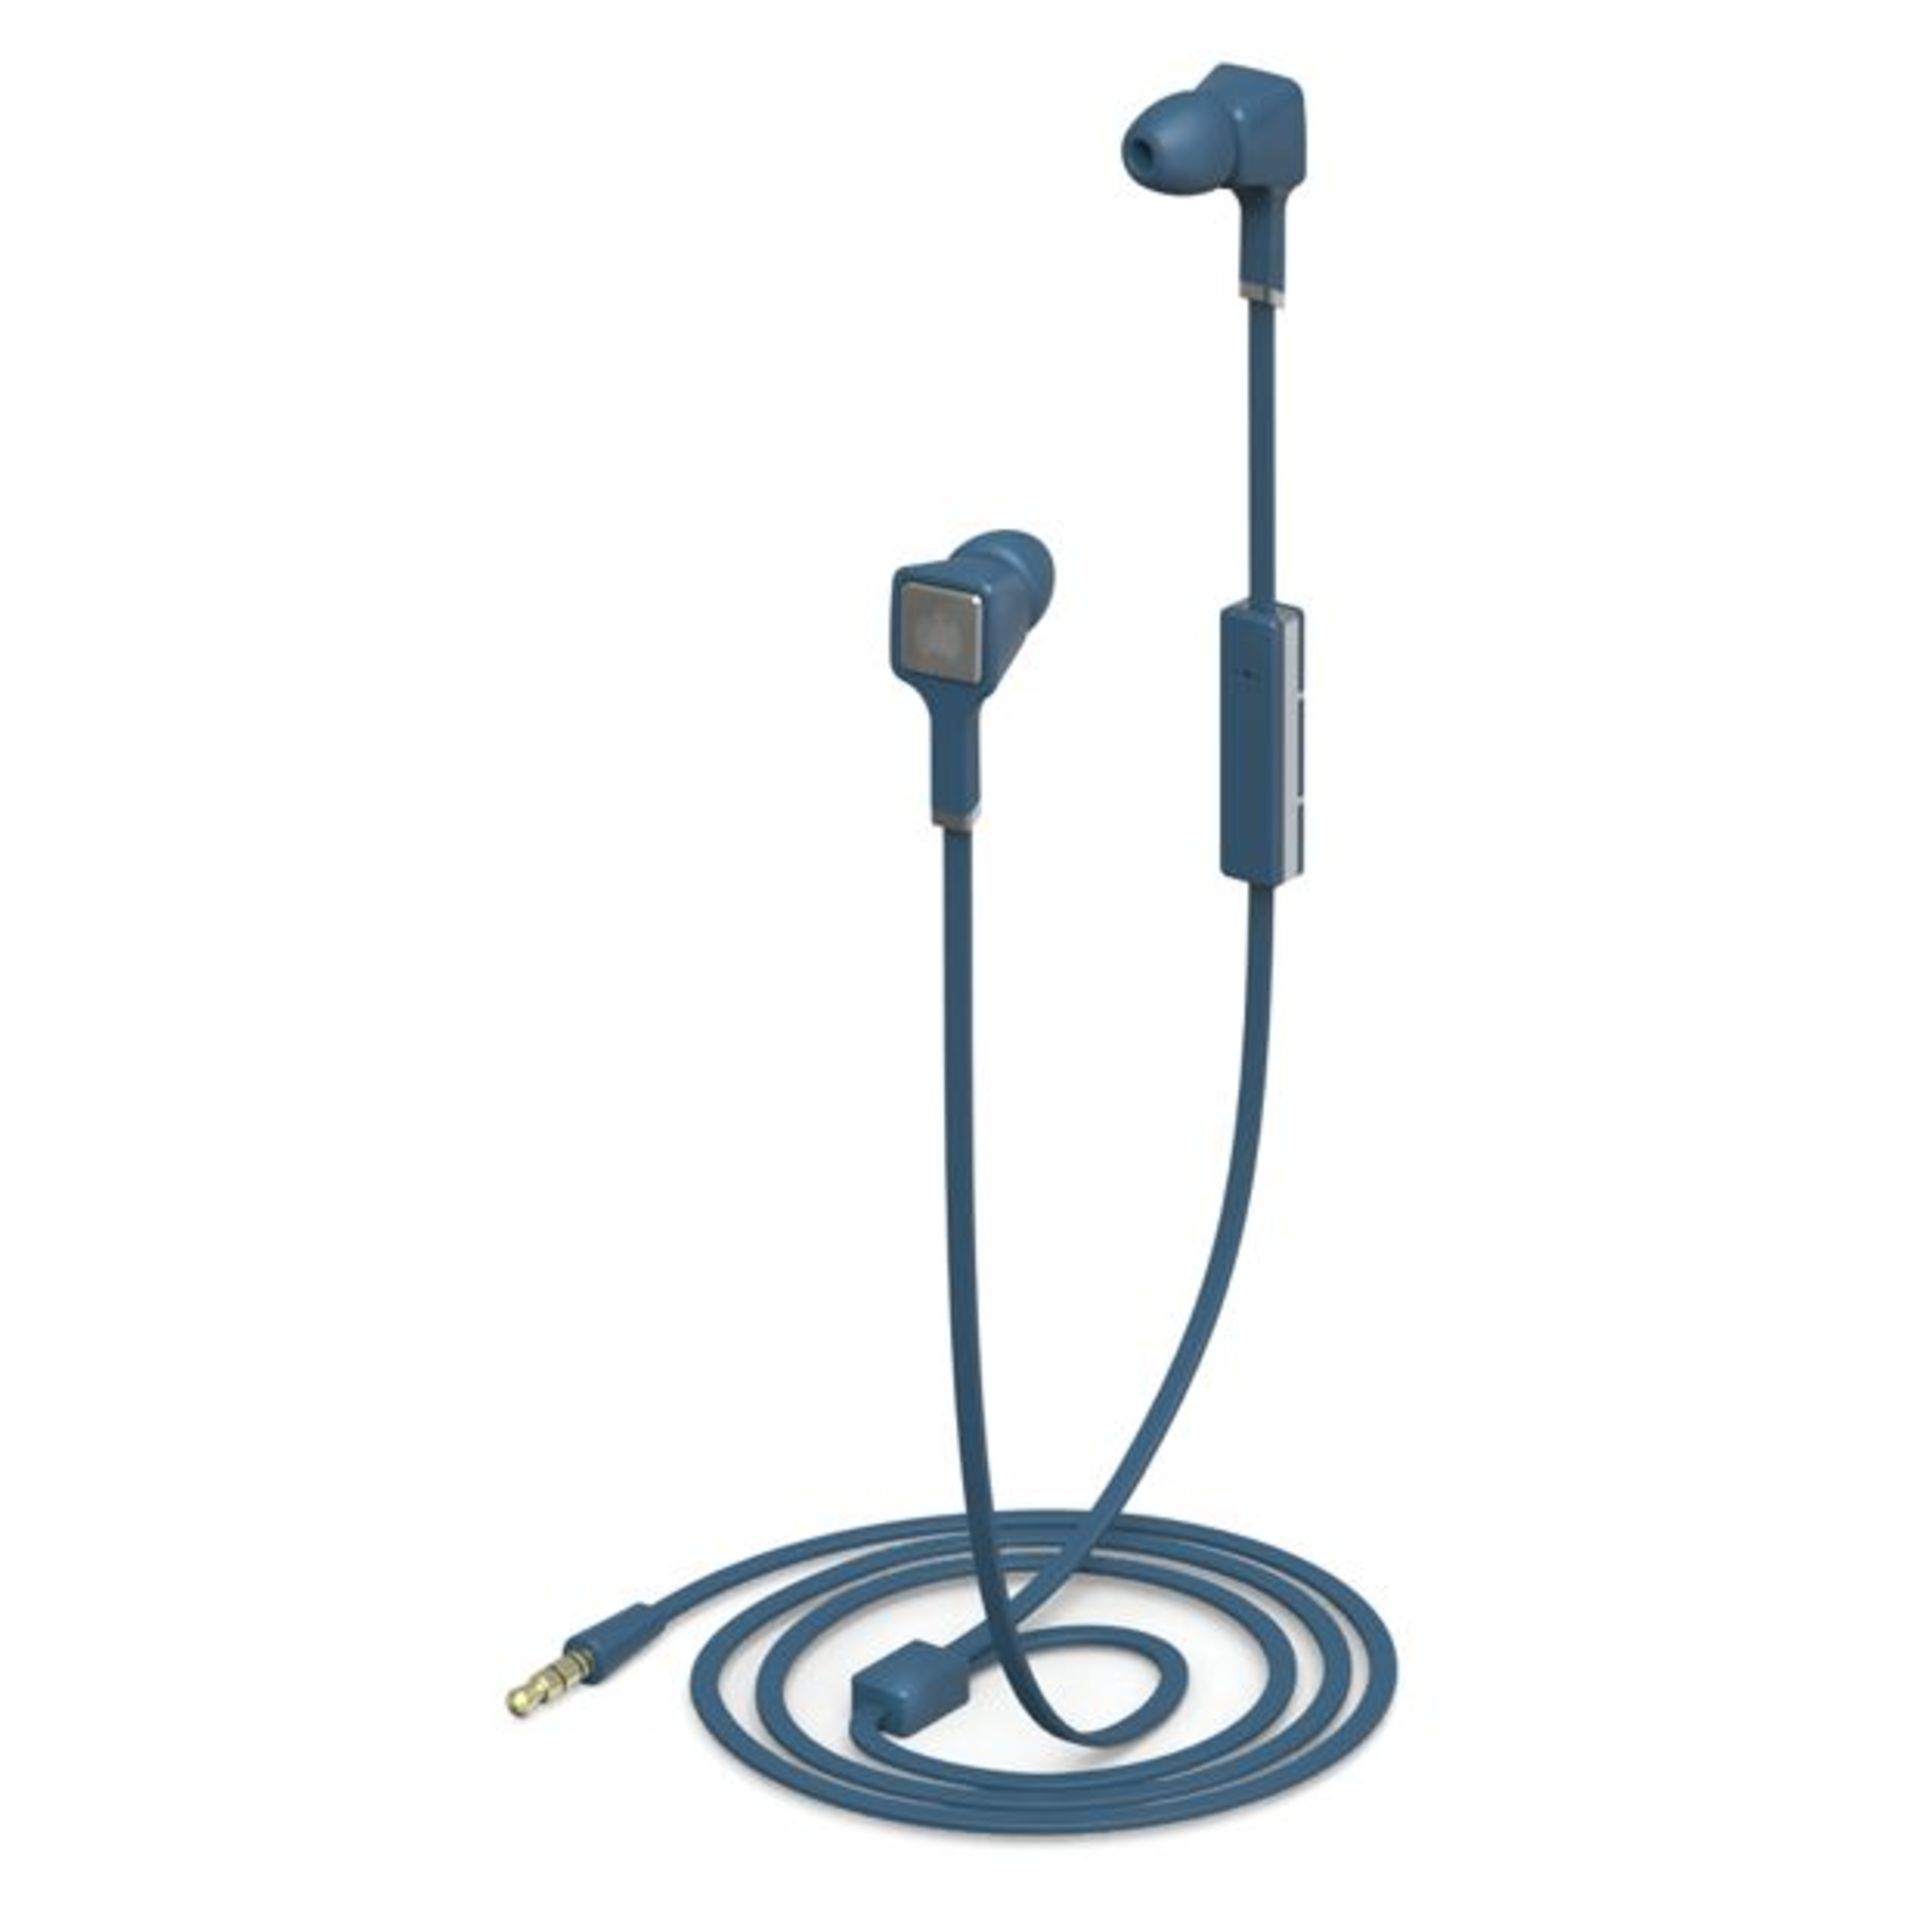 V *TRADE QTY* Brand New Ministry Of Sound Audio In - In Ear Headphones - Blue/Grey - RRP£39.99 X 4